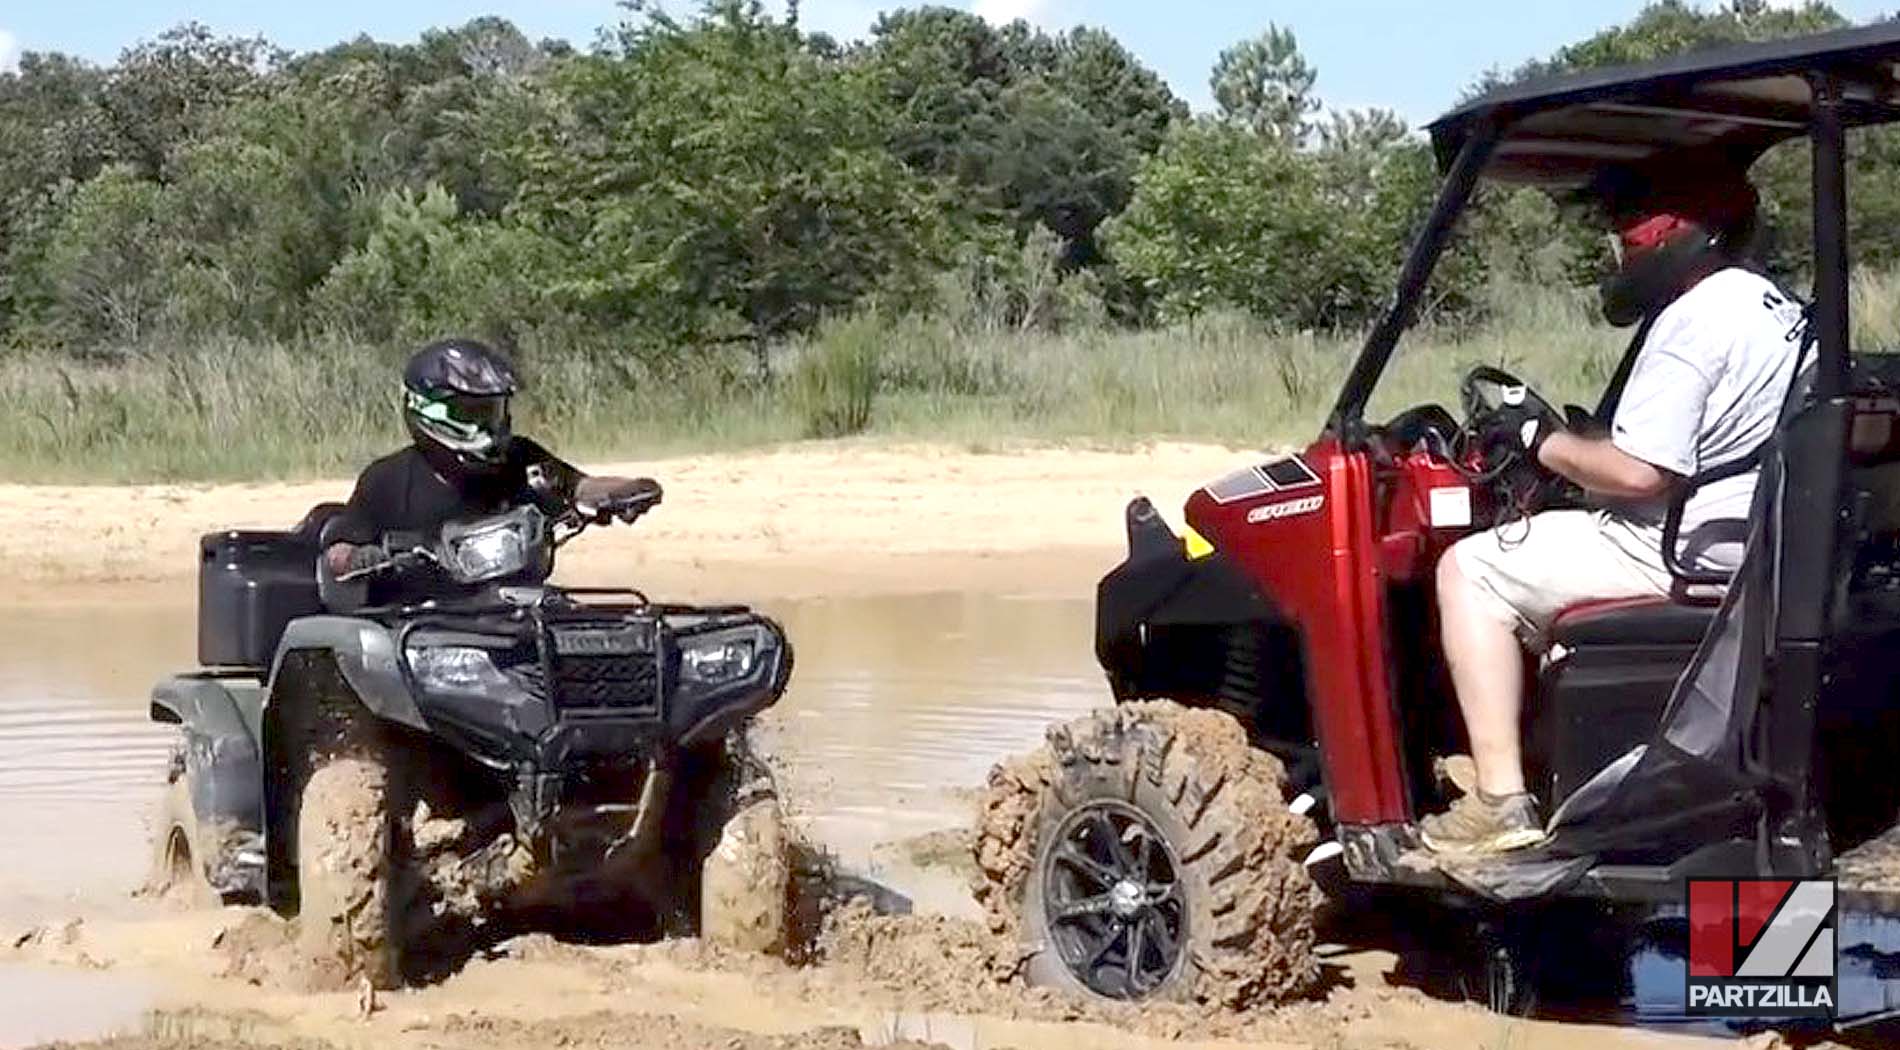 Tips for cleaning muddy ATVS or UTVs